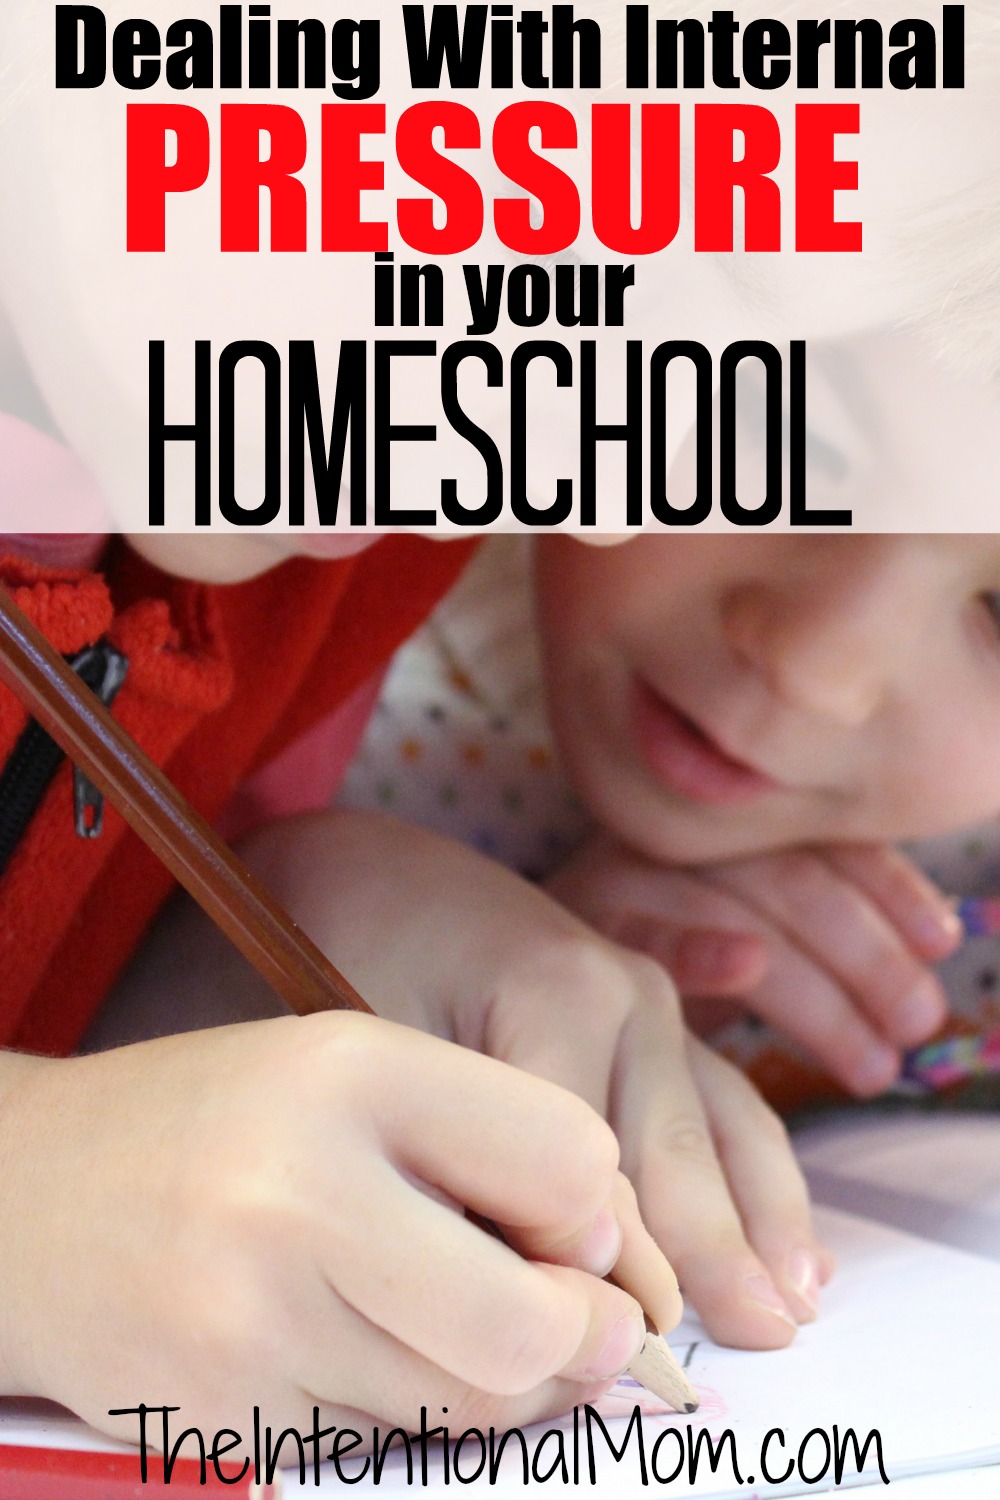 Dealing With Internal Pressure in Your Homeschool